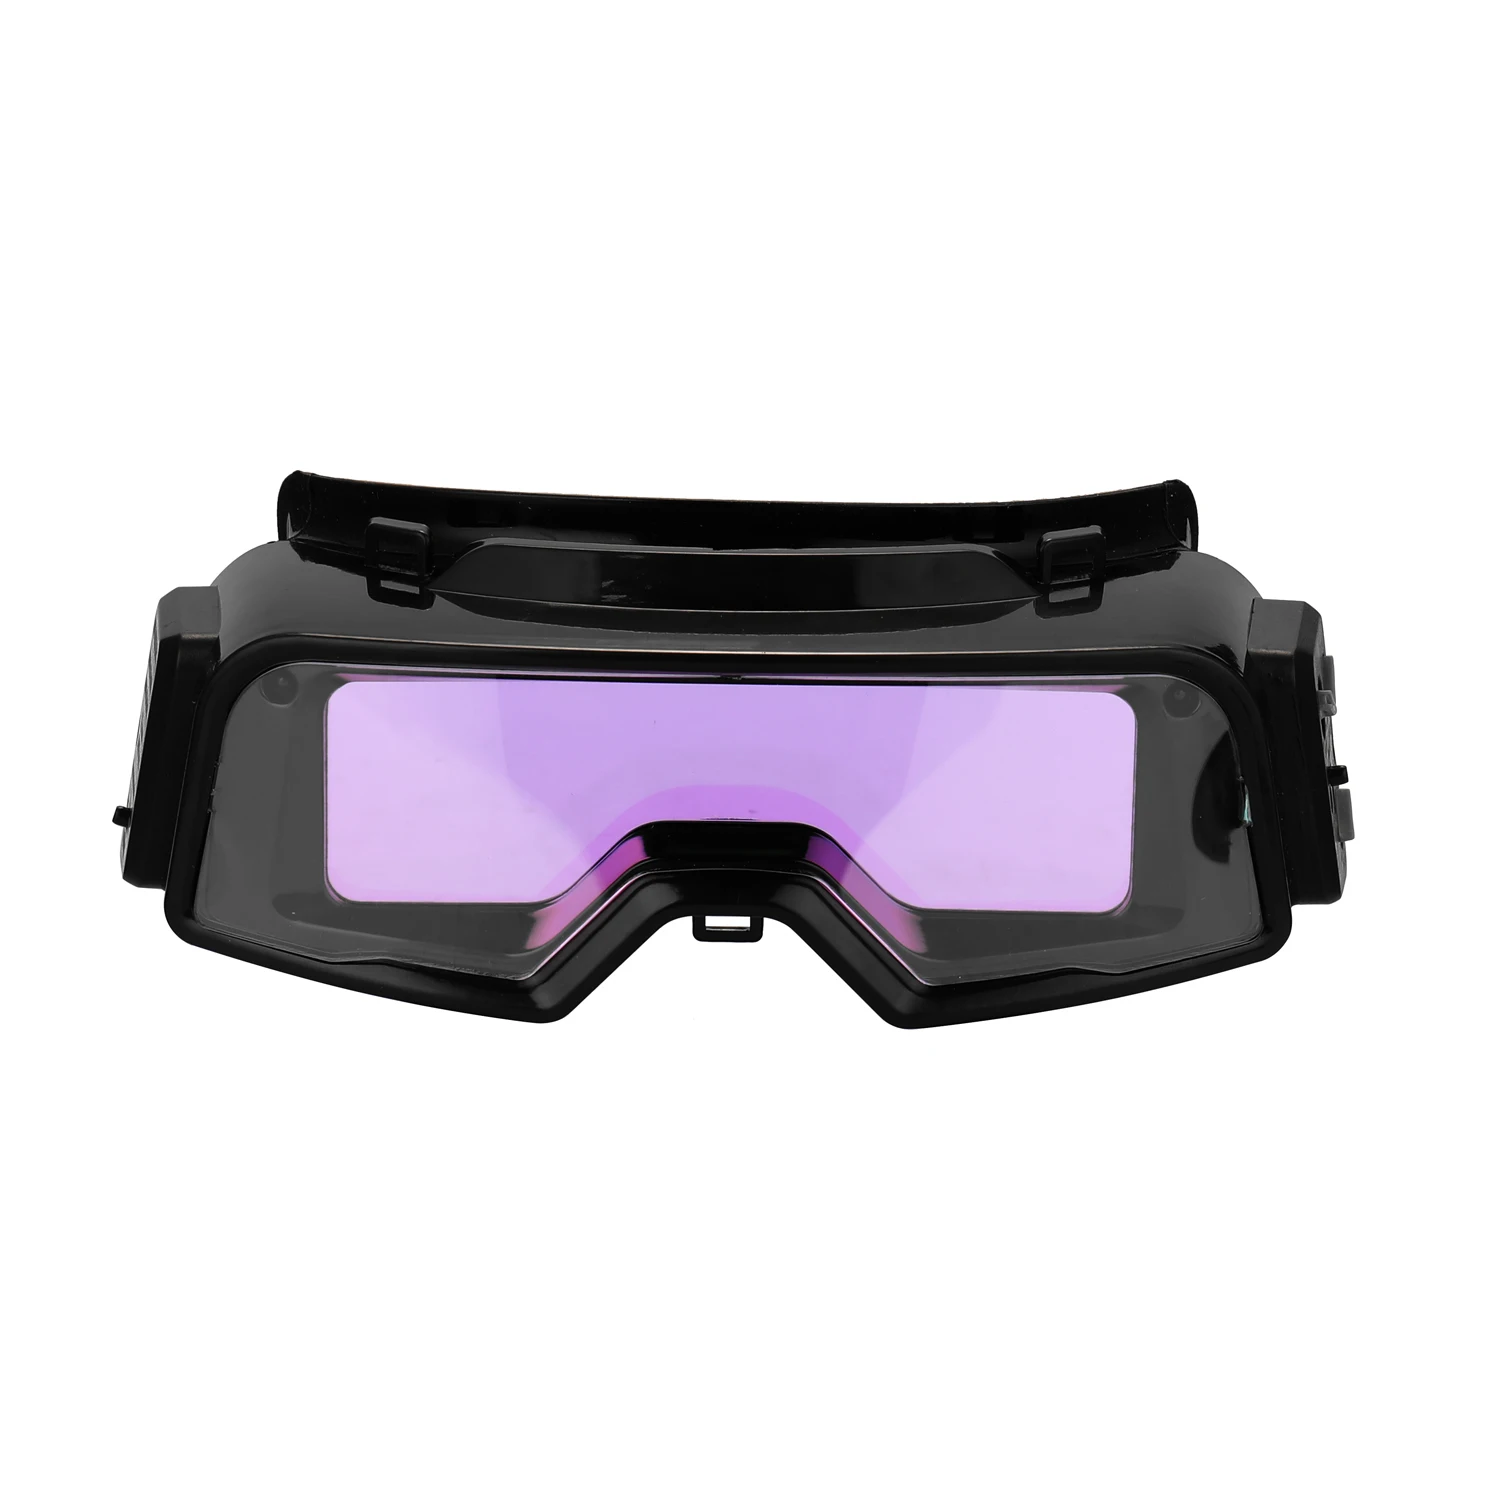 cheap welding helmets Auto Darkening Welding Goggles for TIG MIG MMA Professional Weld Glasses Goggles Multifunction Utility Tool best welding rod for beginners